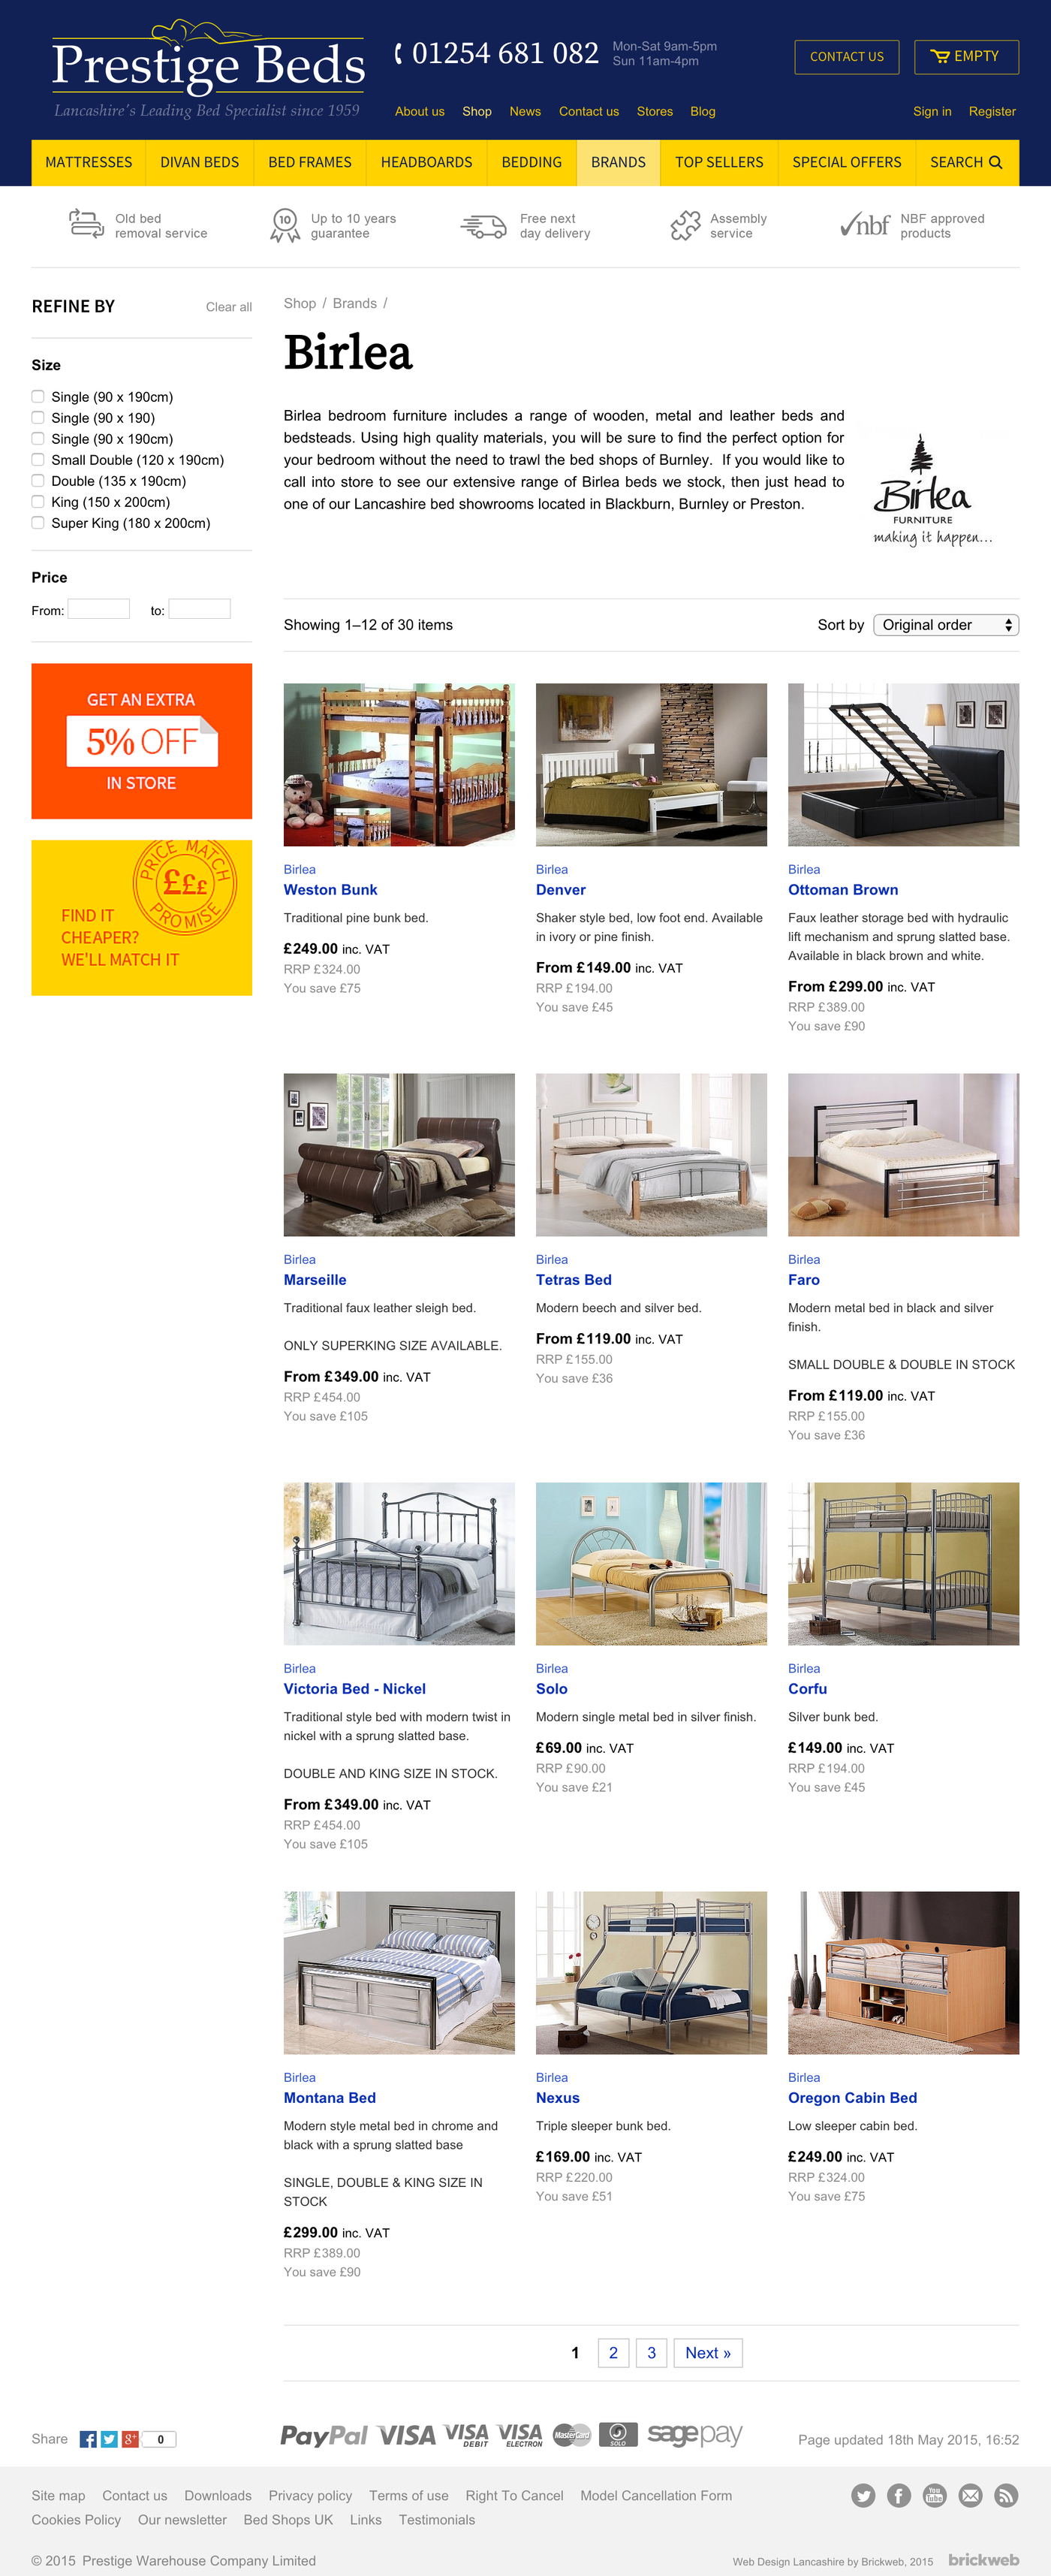 Prestige Beds Products page